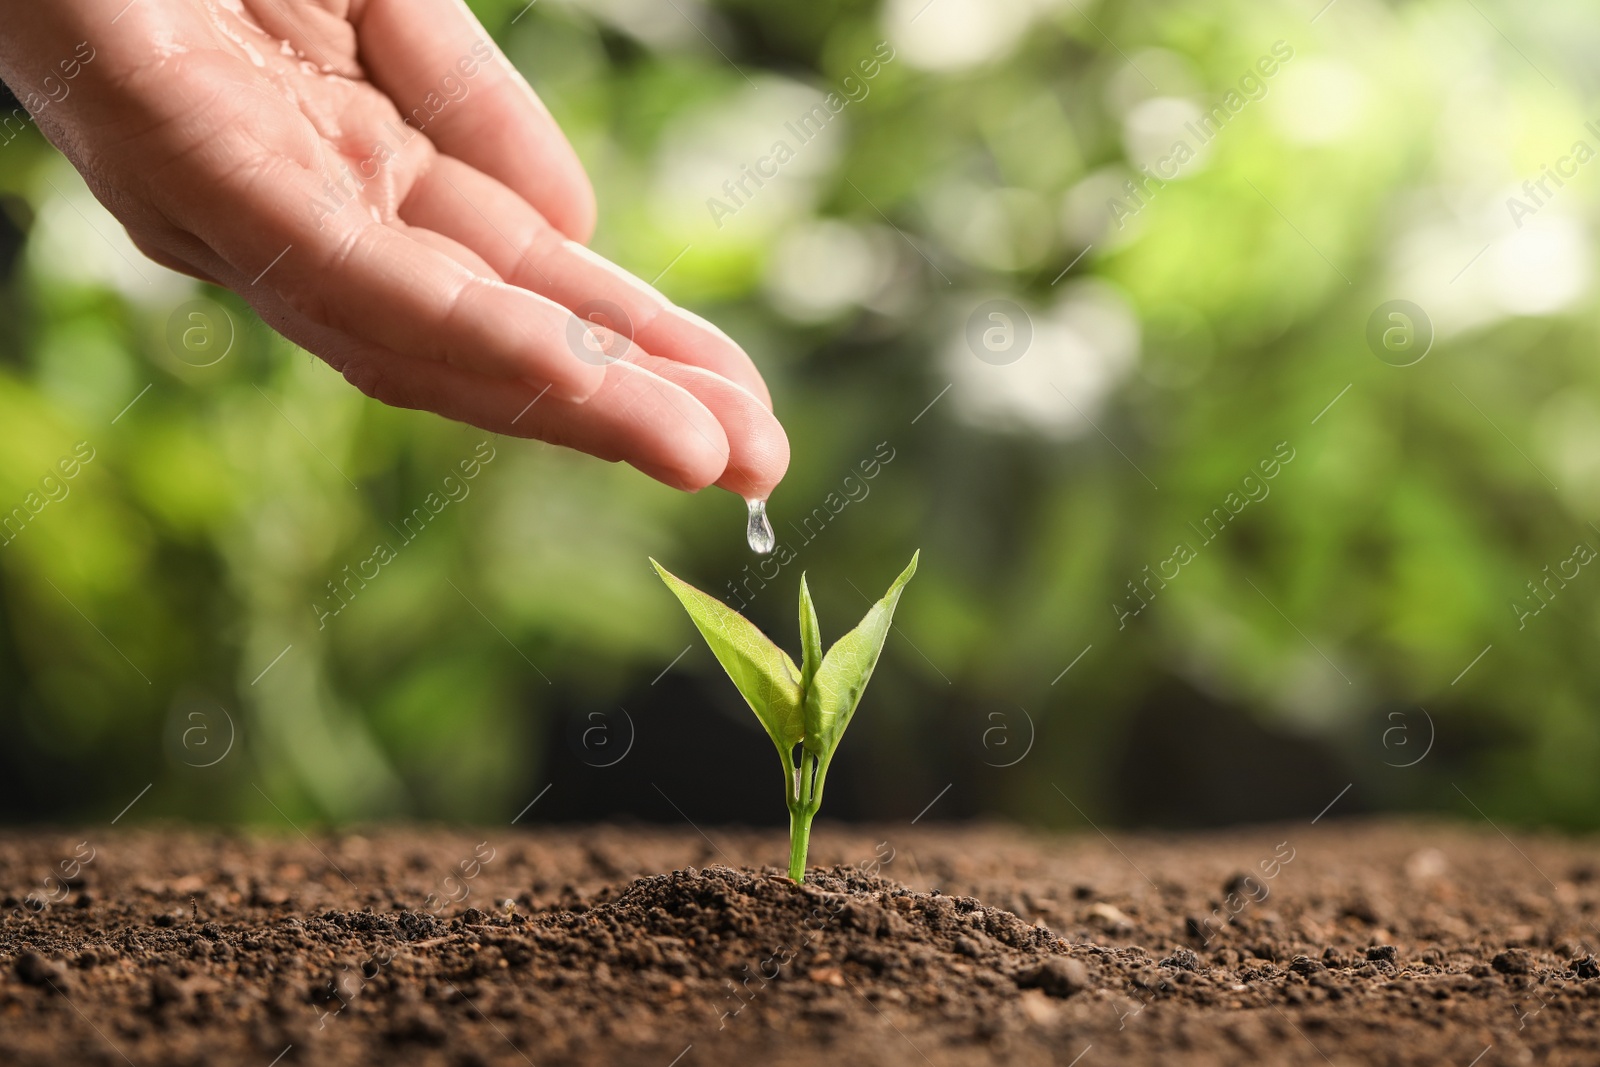 Photo of Farmer pouring water on young seedling in soil against blurred background, closeup. Space for text